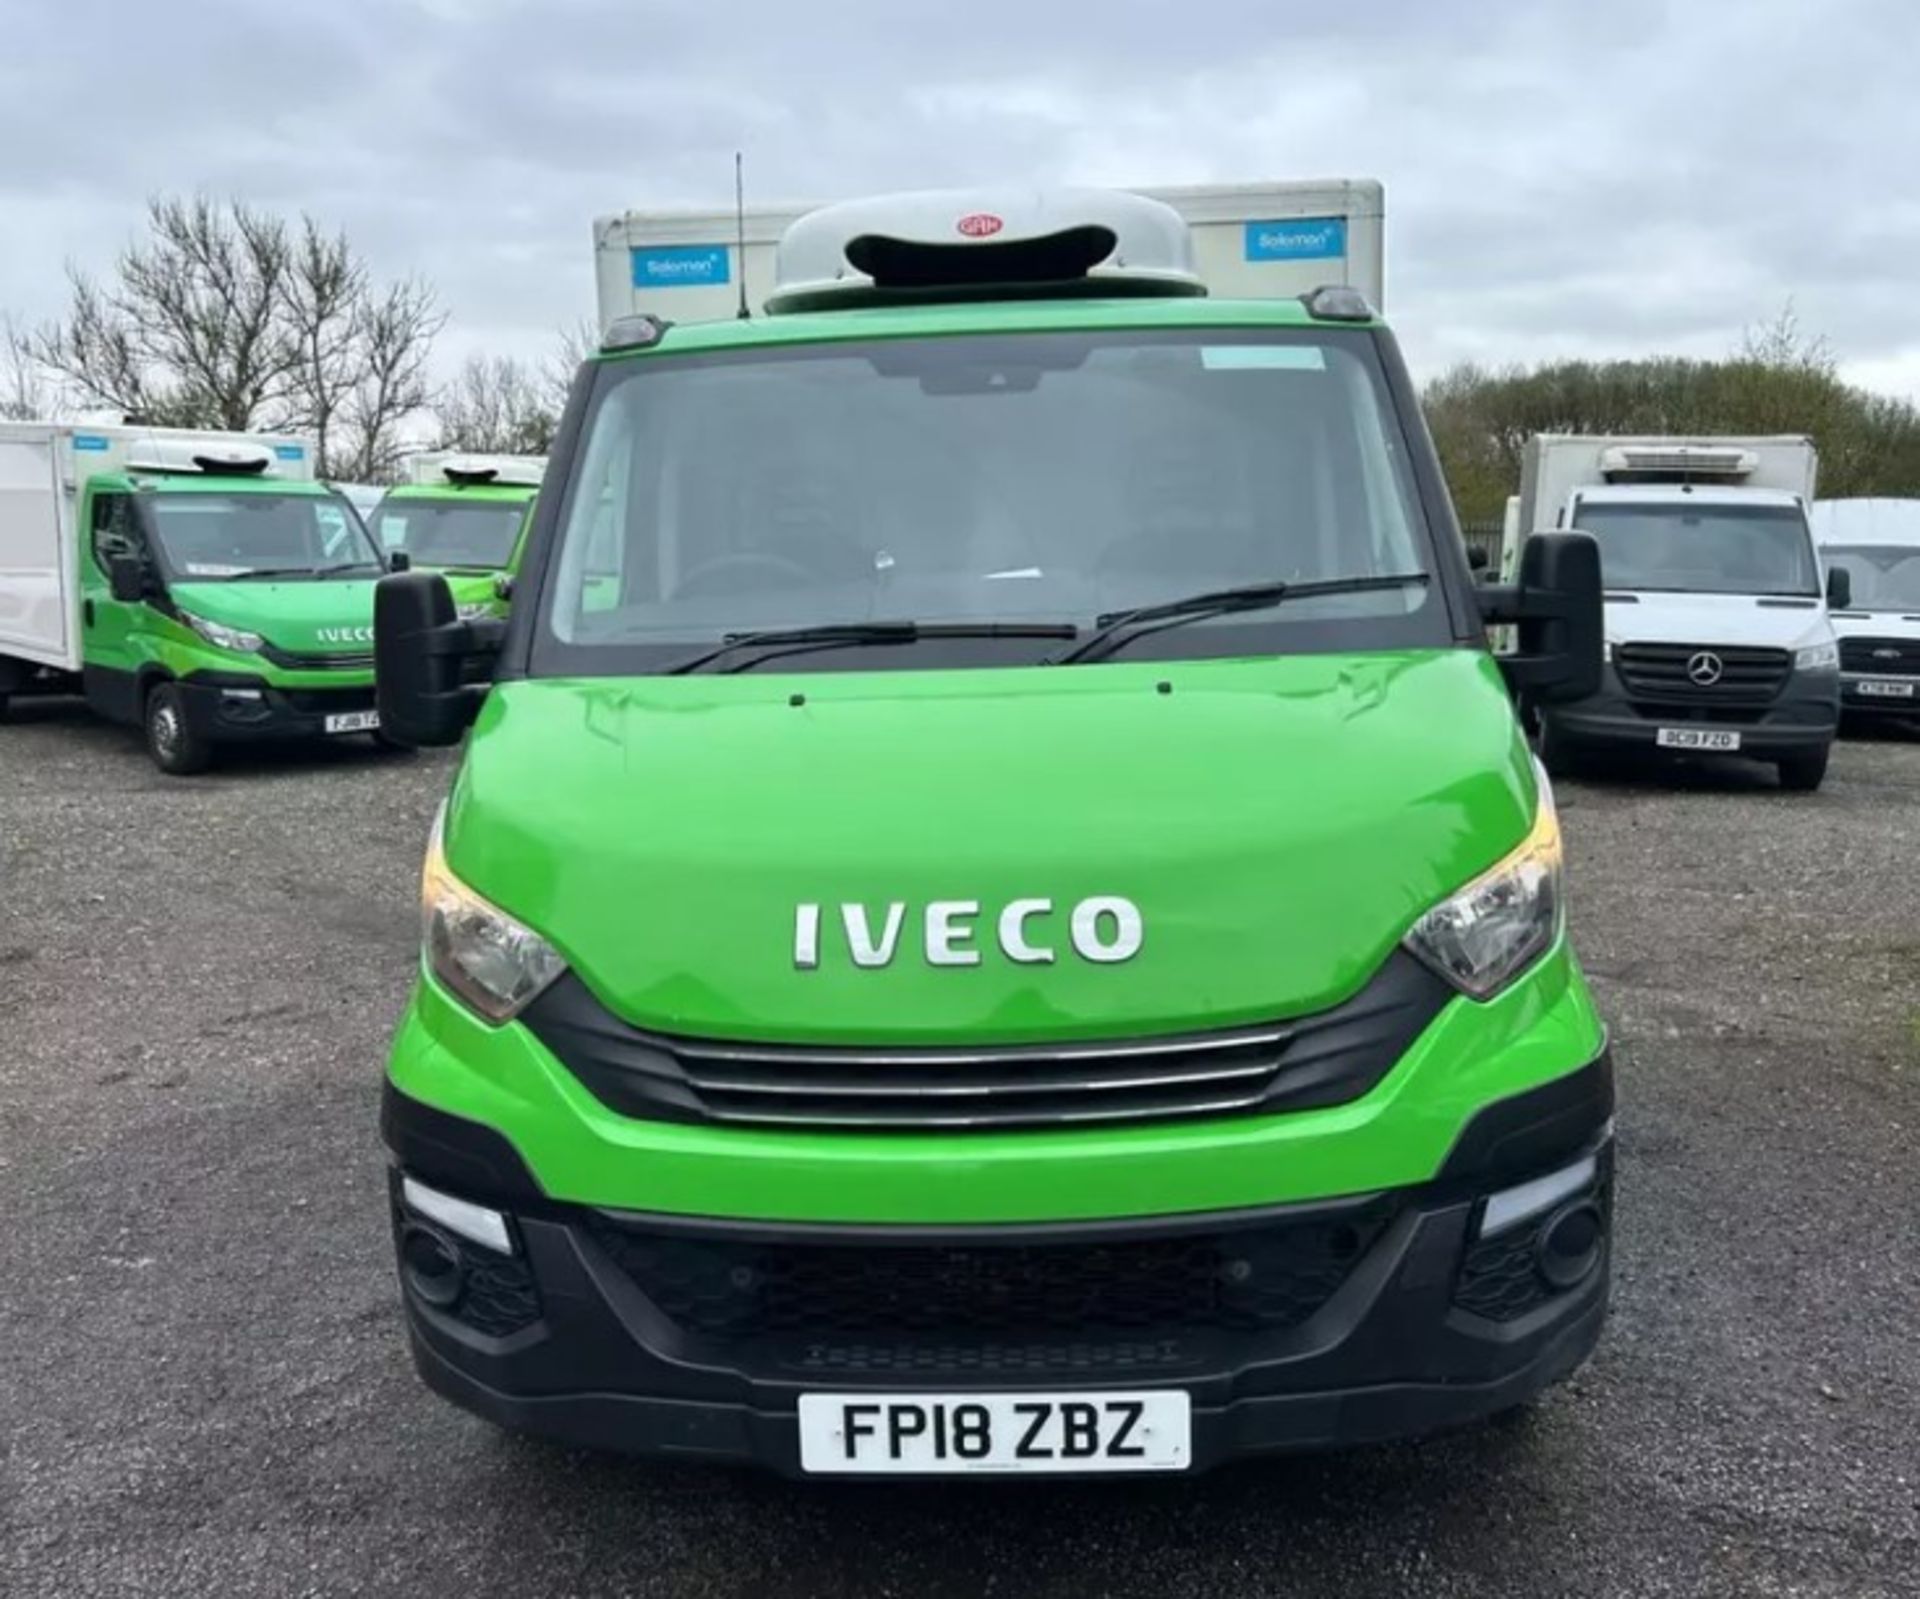 >>>SPECIAL CLEARANCE<<< EXCEPTIONAL PERFORMANCE AND VERSATILITY: 2018 IVECO DAILY 35S12 CHASSIS CAB - Bild 2 aus 10